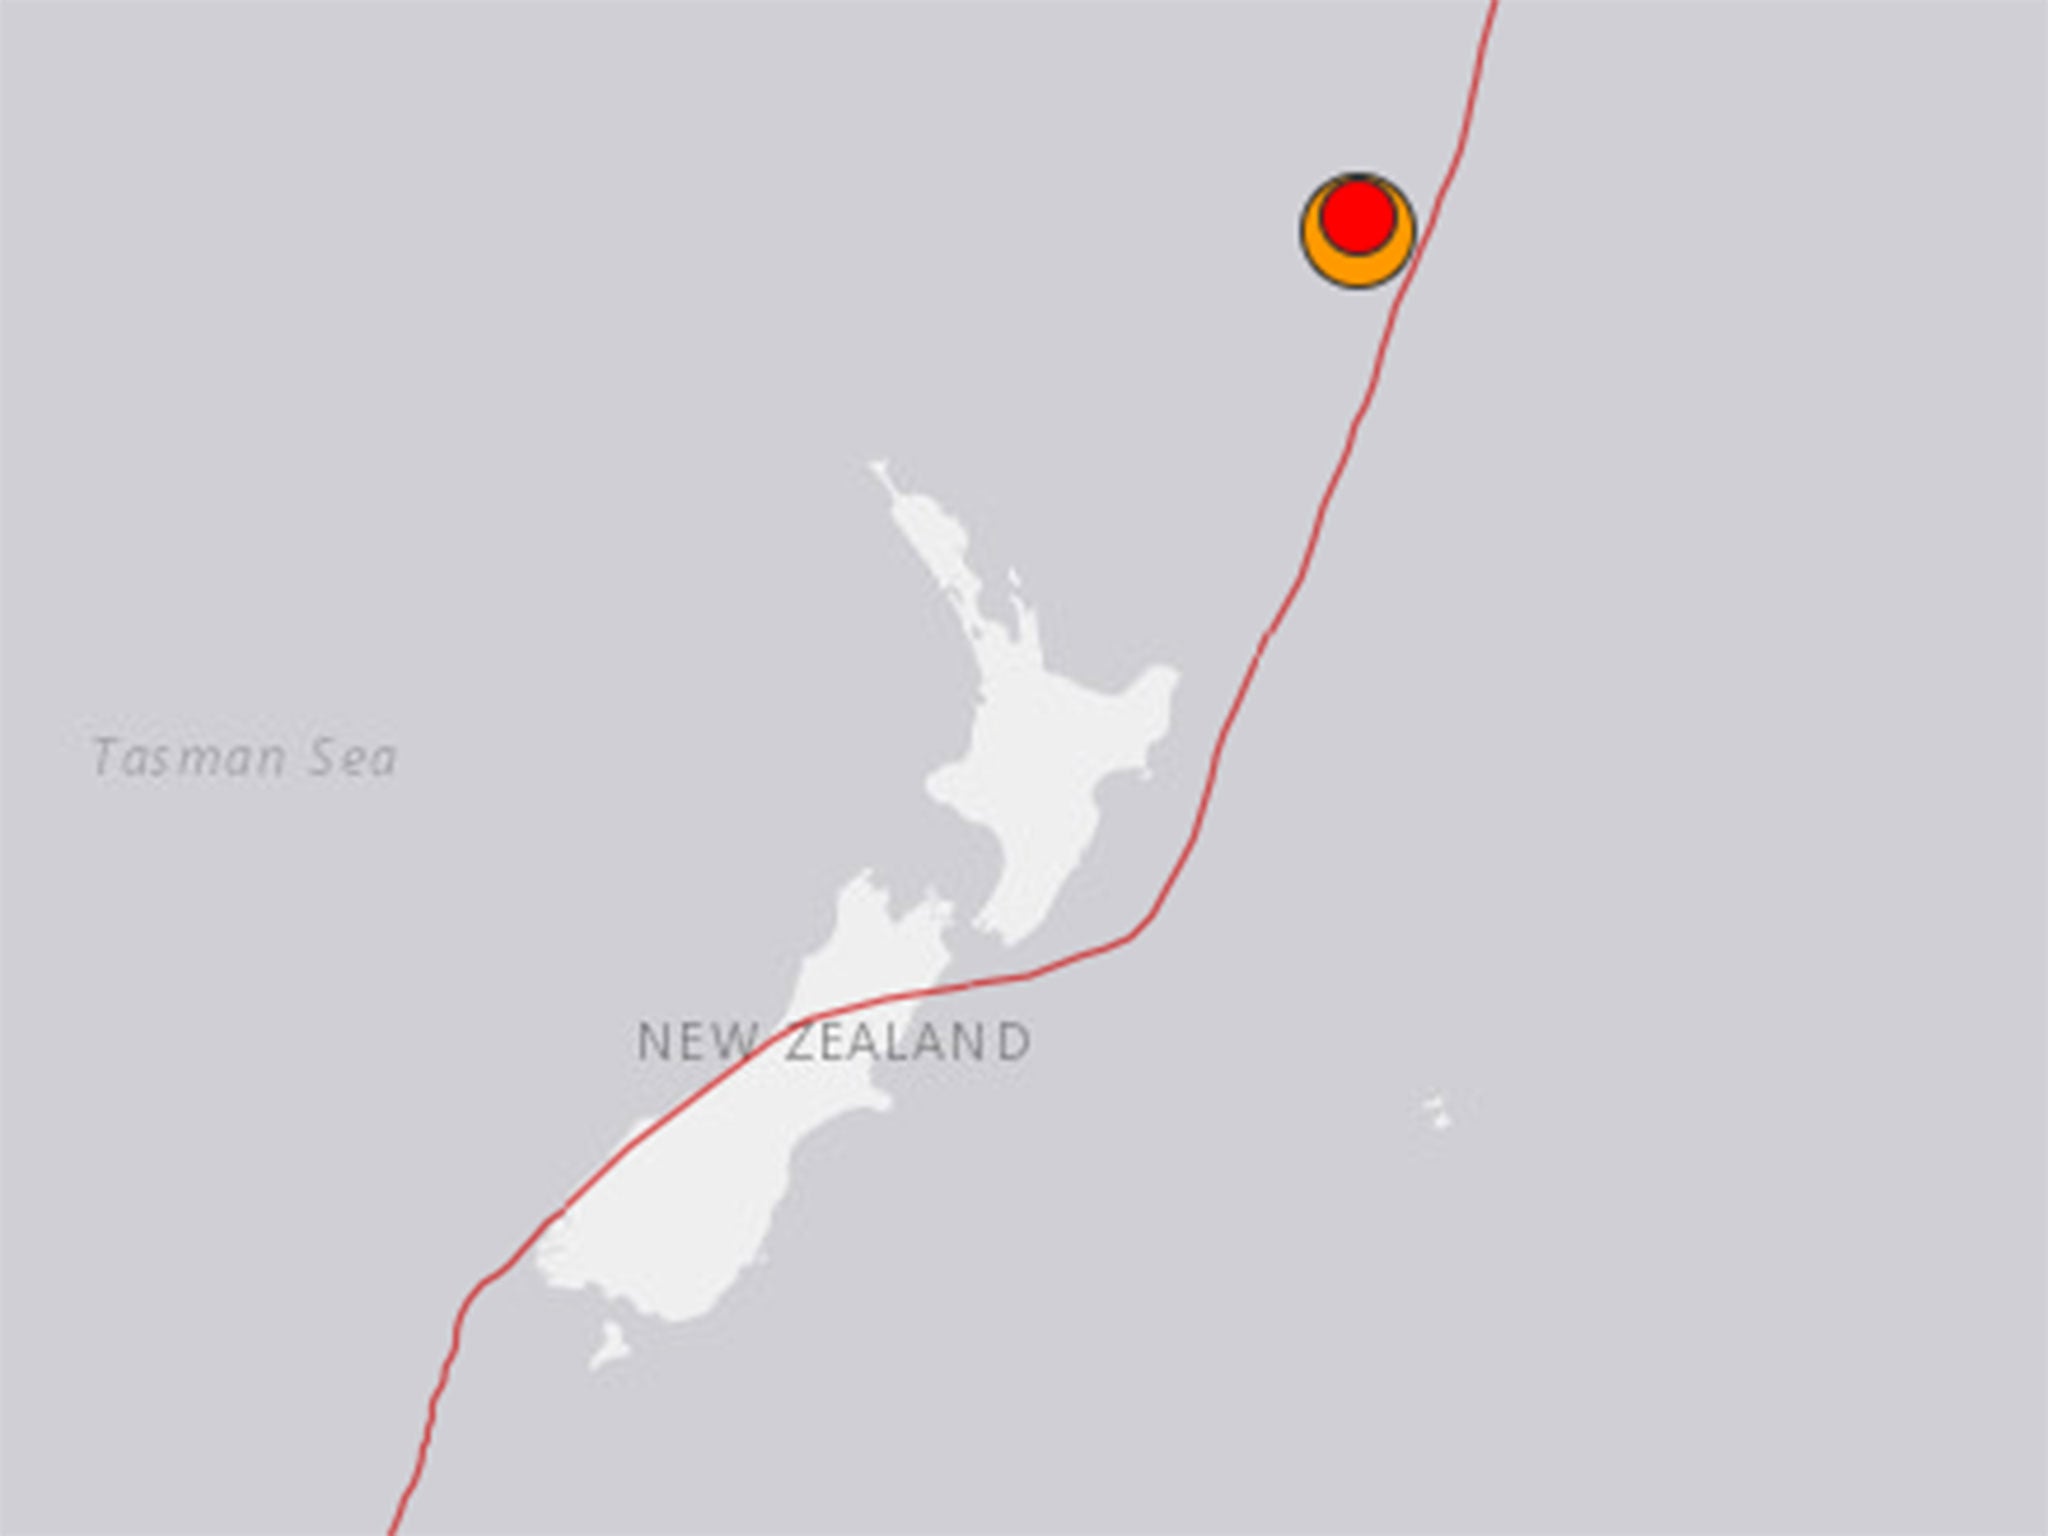 A 7.4 magnitude earthquake struck on Sunday in the Kermadec Islands region of the South Pacific